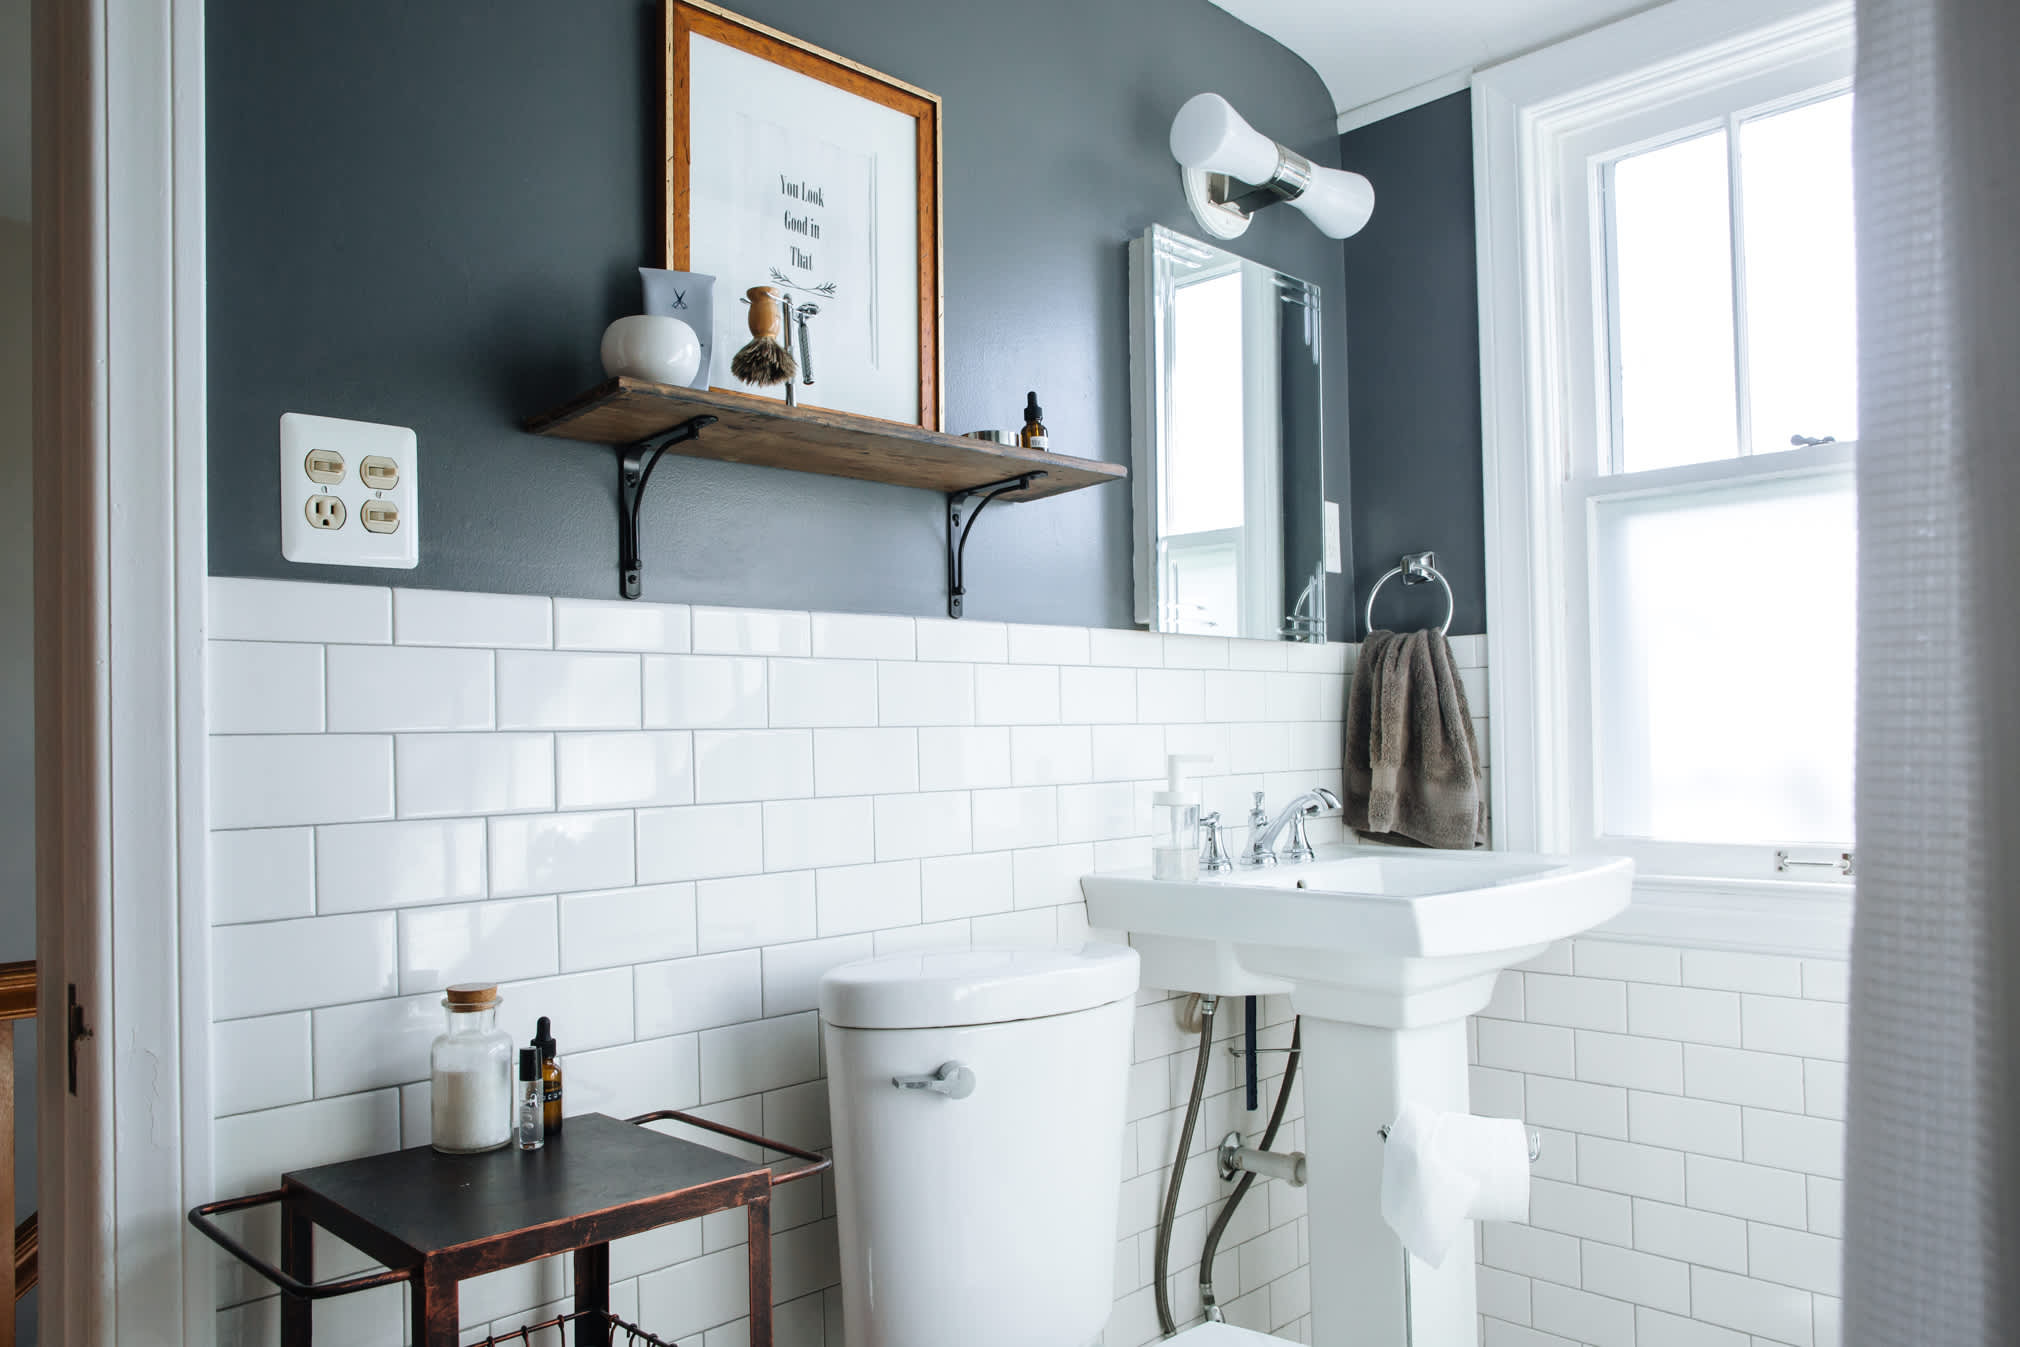 Popular Paint Colors For Bathrooms
 Best Paint Colors for Small Bathrooms